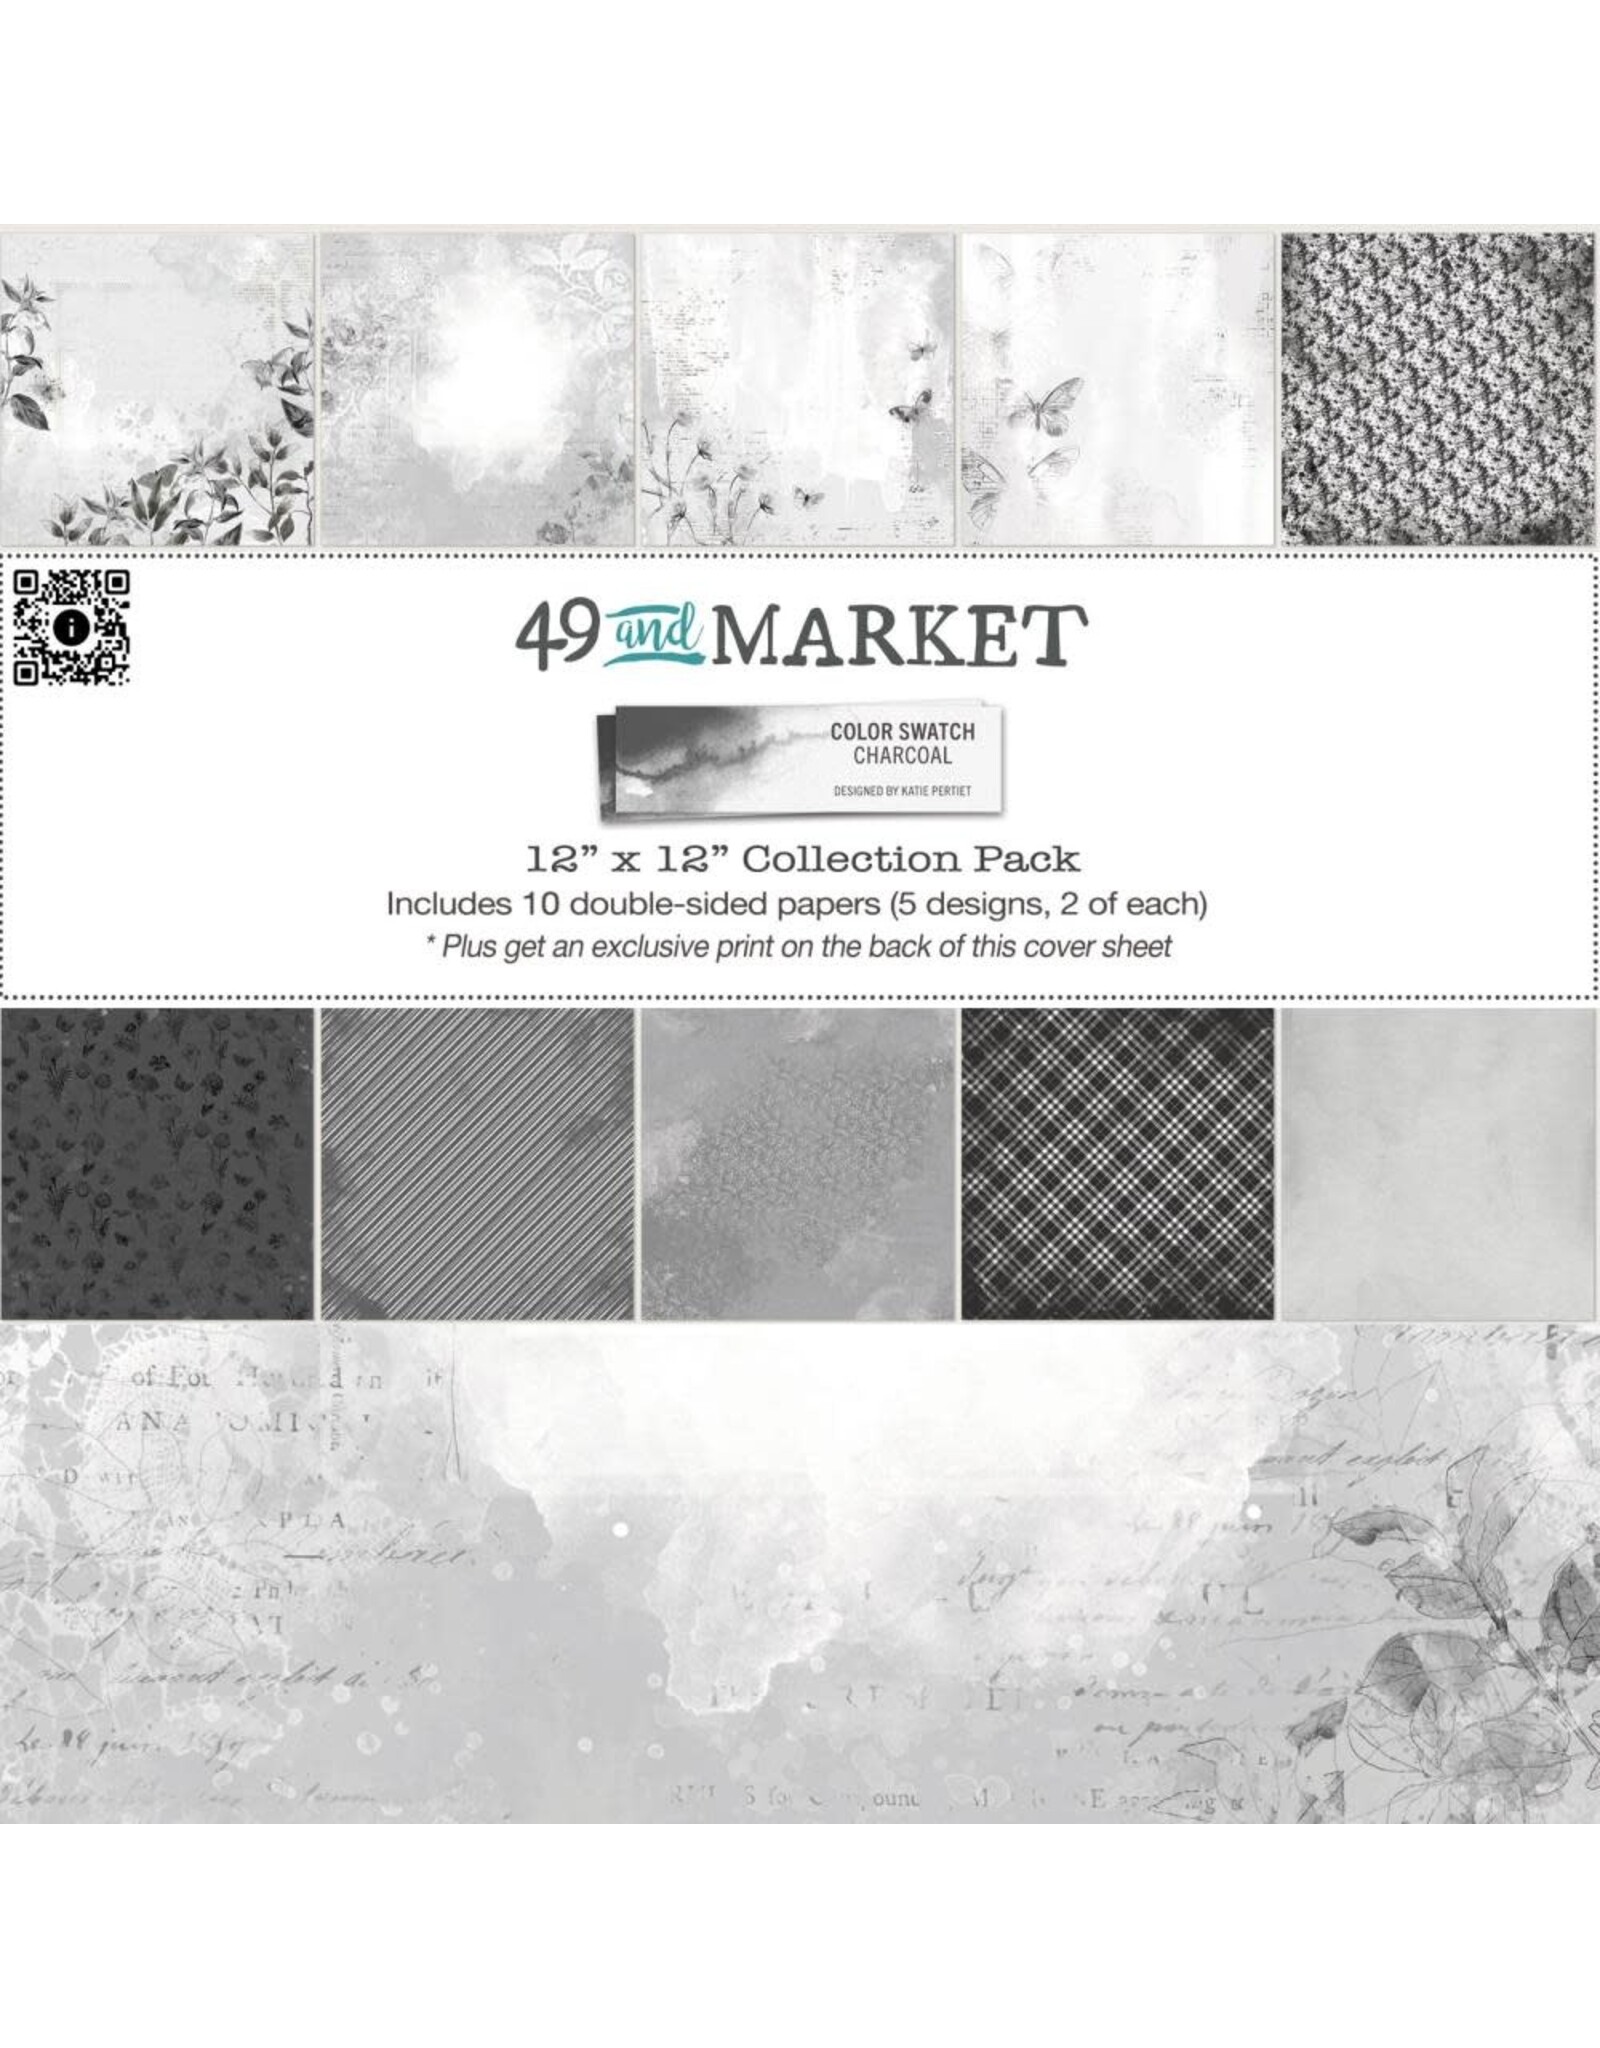 49 AND MARKET Color Swatch: Charcoal 12X12 Colelction Pack